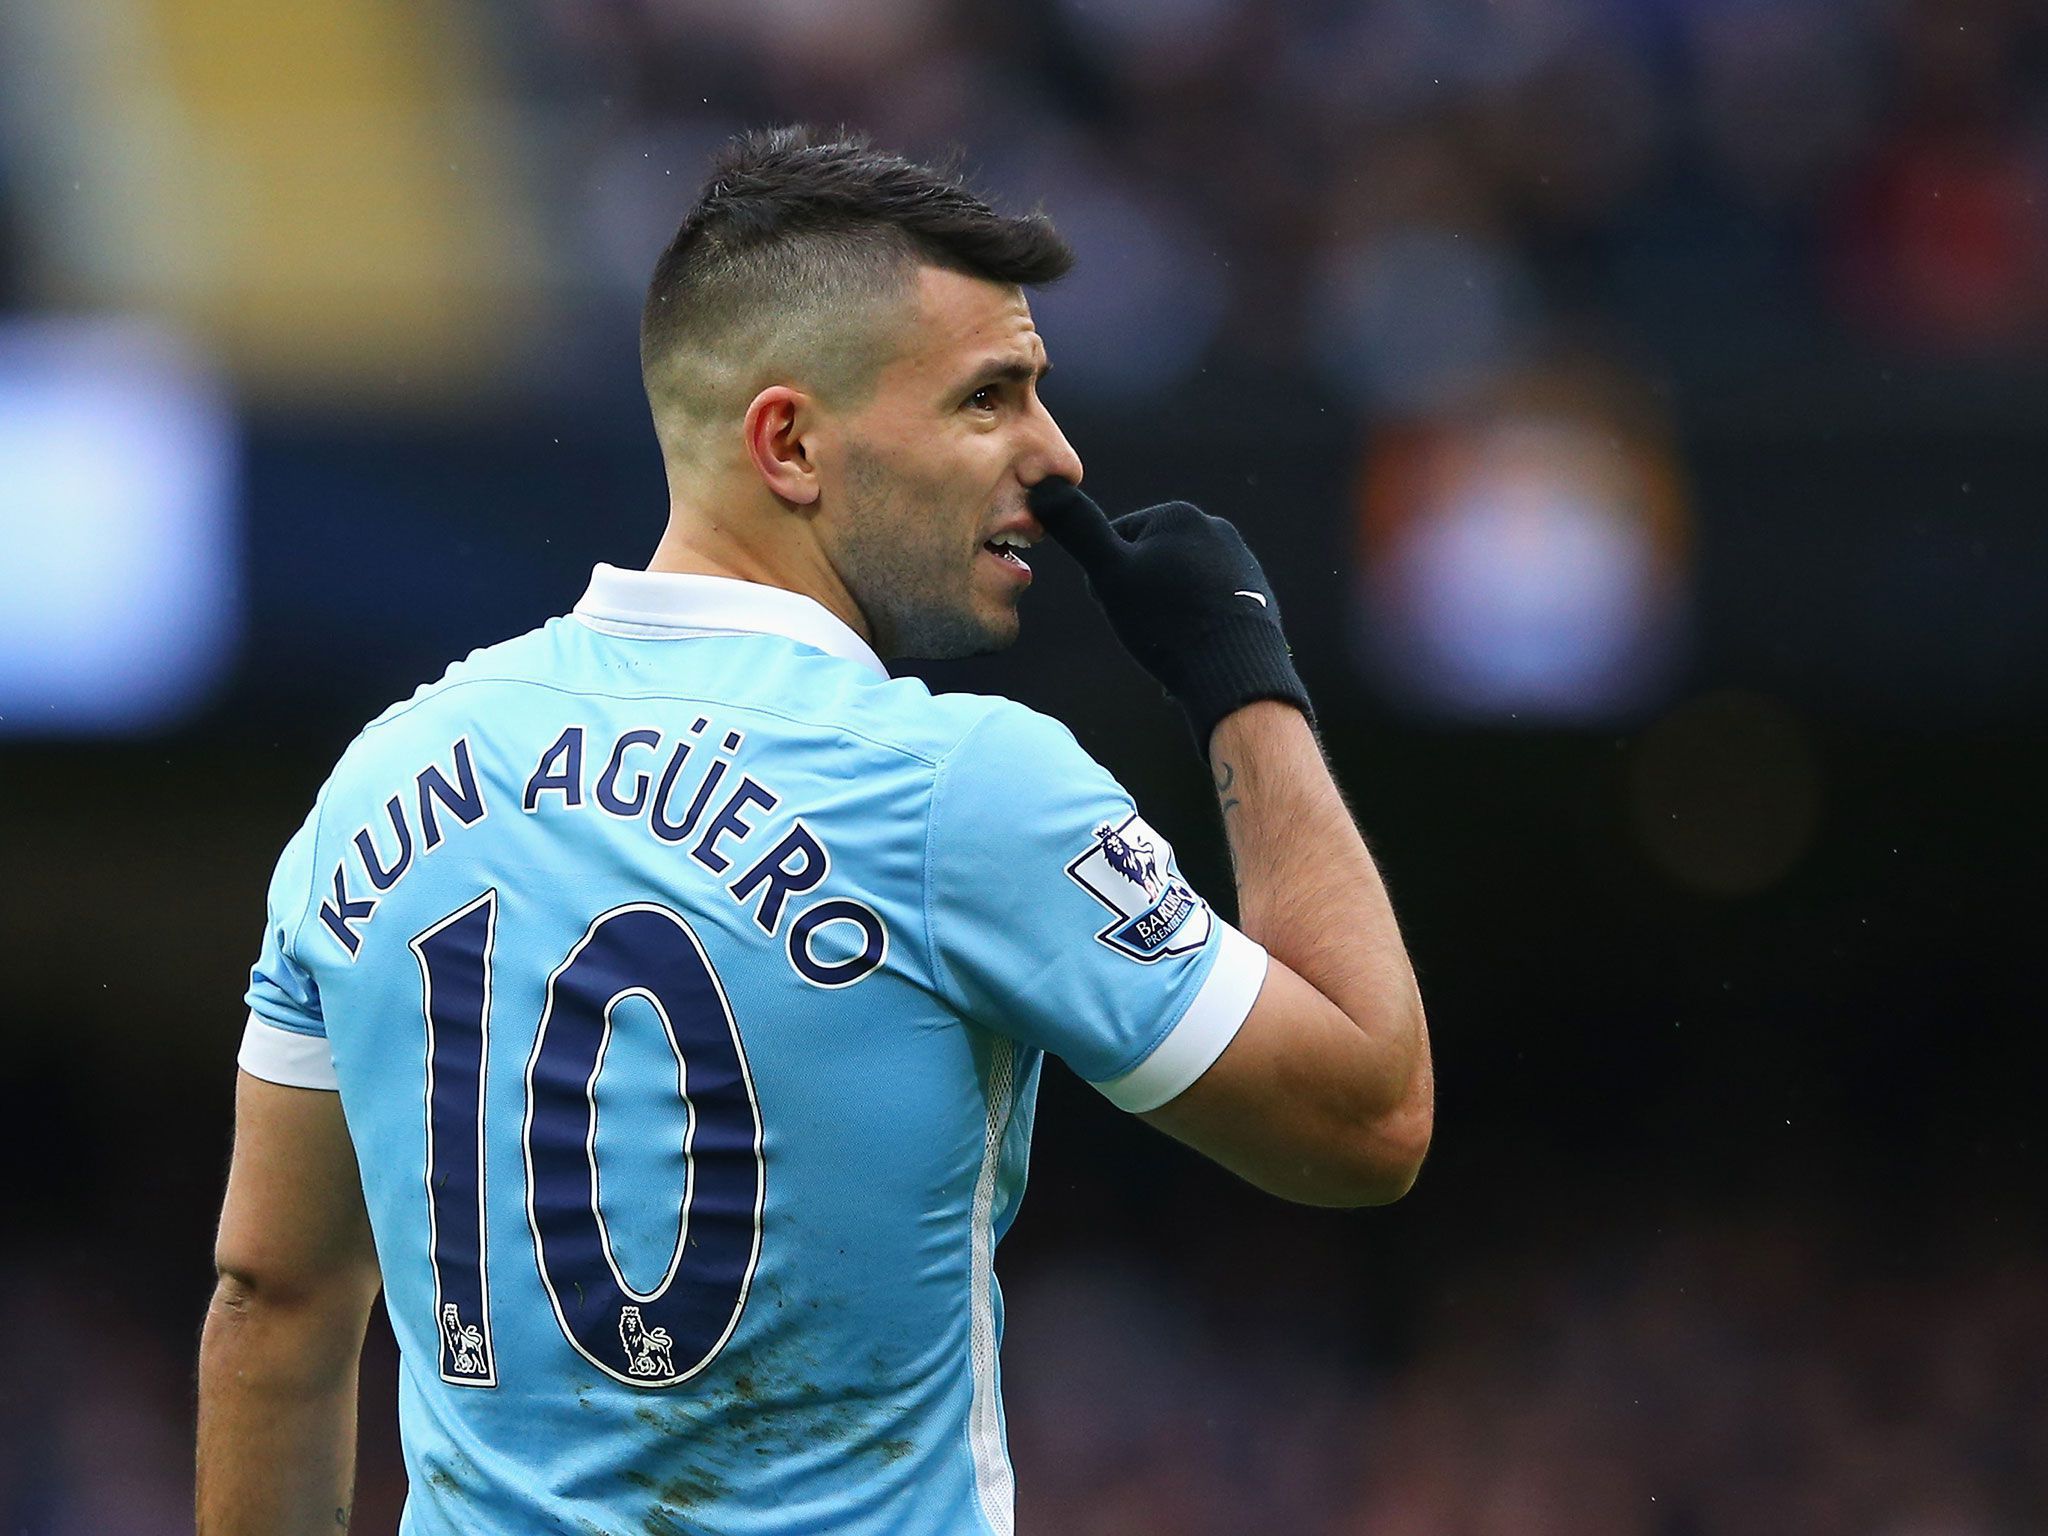 Sergio Aguero Wallpapers Images Photos Pictures Backgrounds